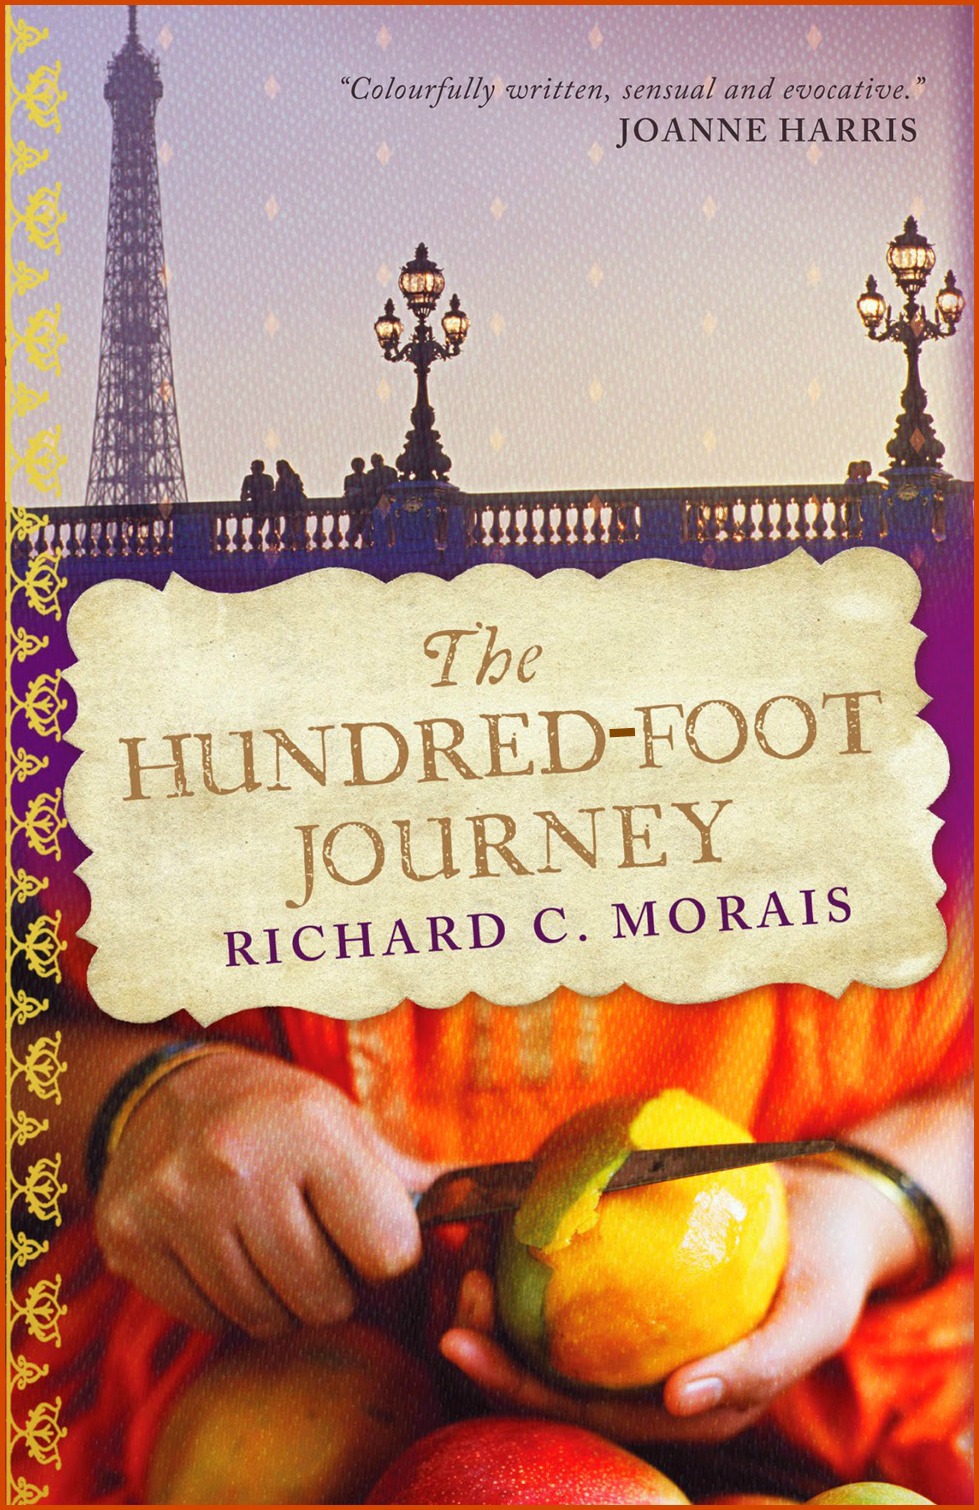 Cover of The Hundred-Foot Journey by Richard C. Morais